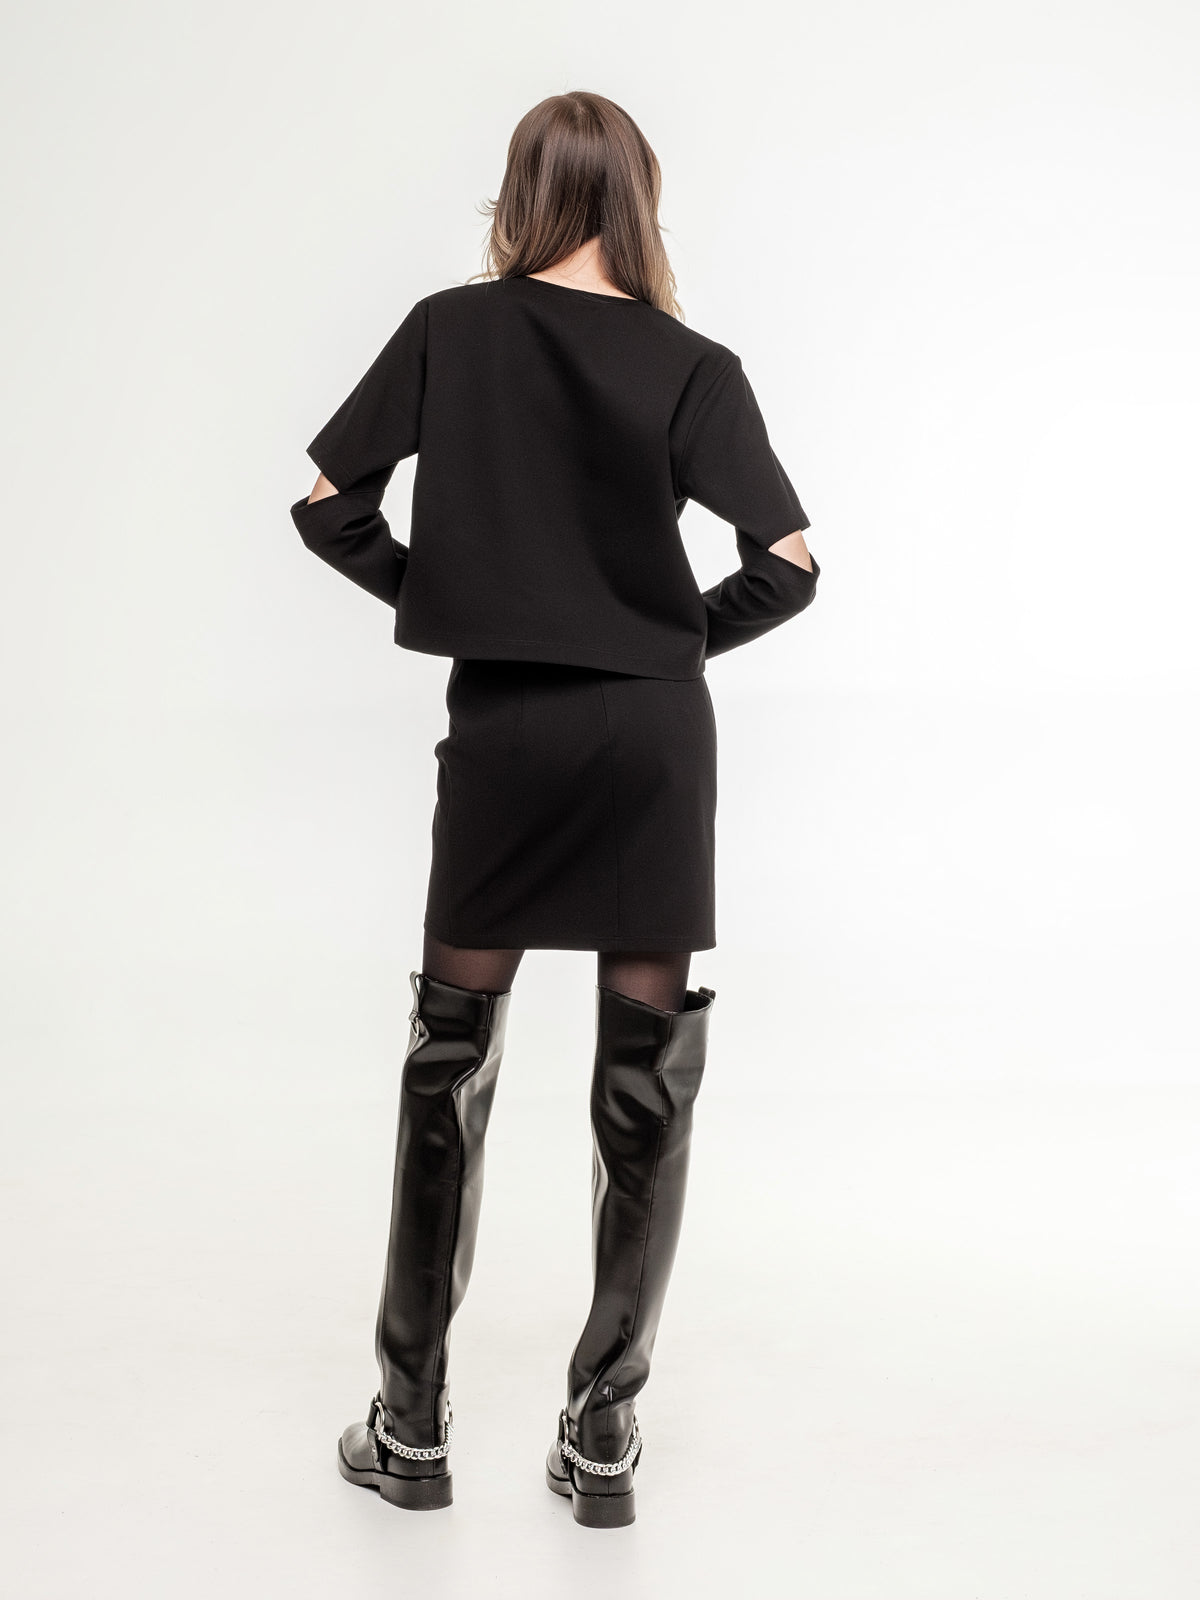 shot black skirt wide and long sleeved top black view from the back